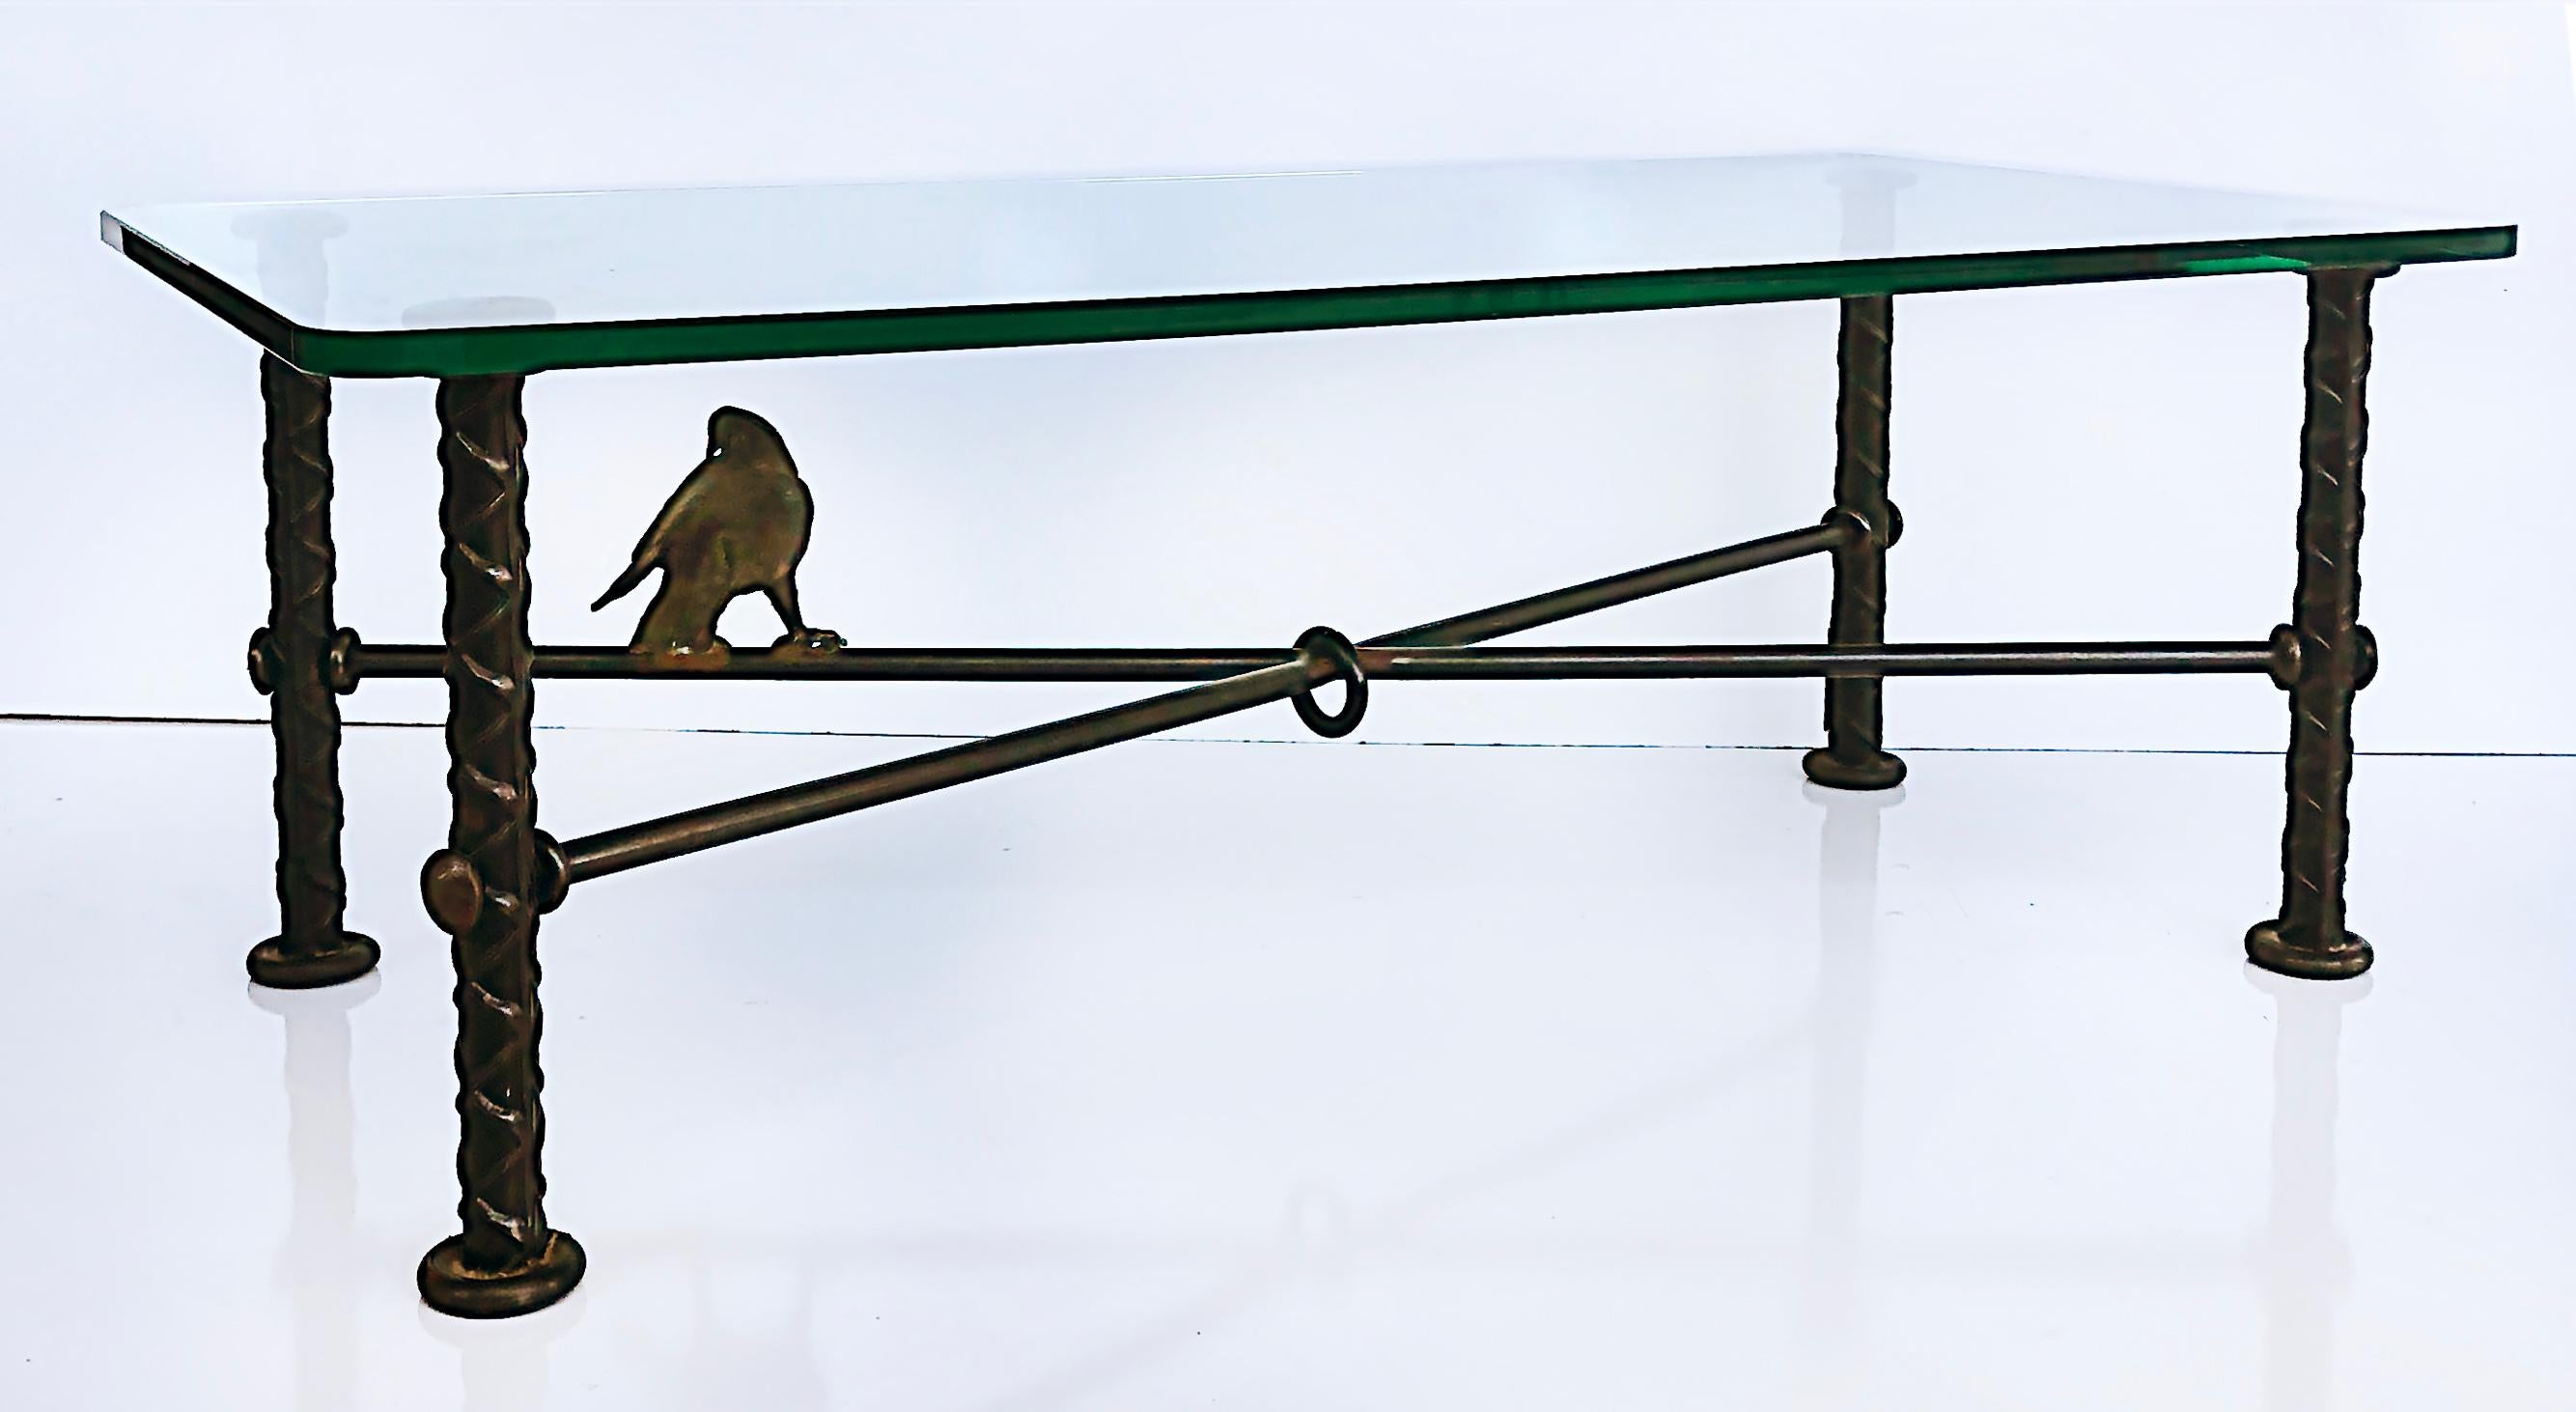 Ilana Goor Brutalist Wrought Iron Bird Coffee Table, Signed and Numbered 39/100 1